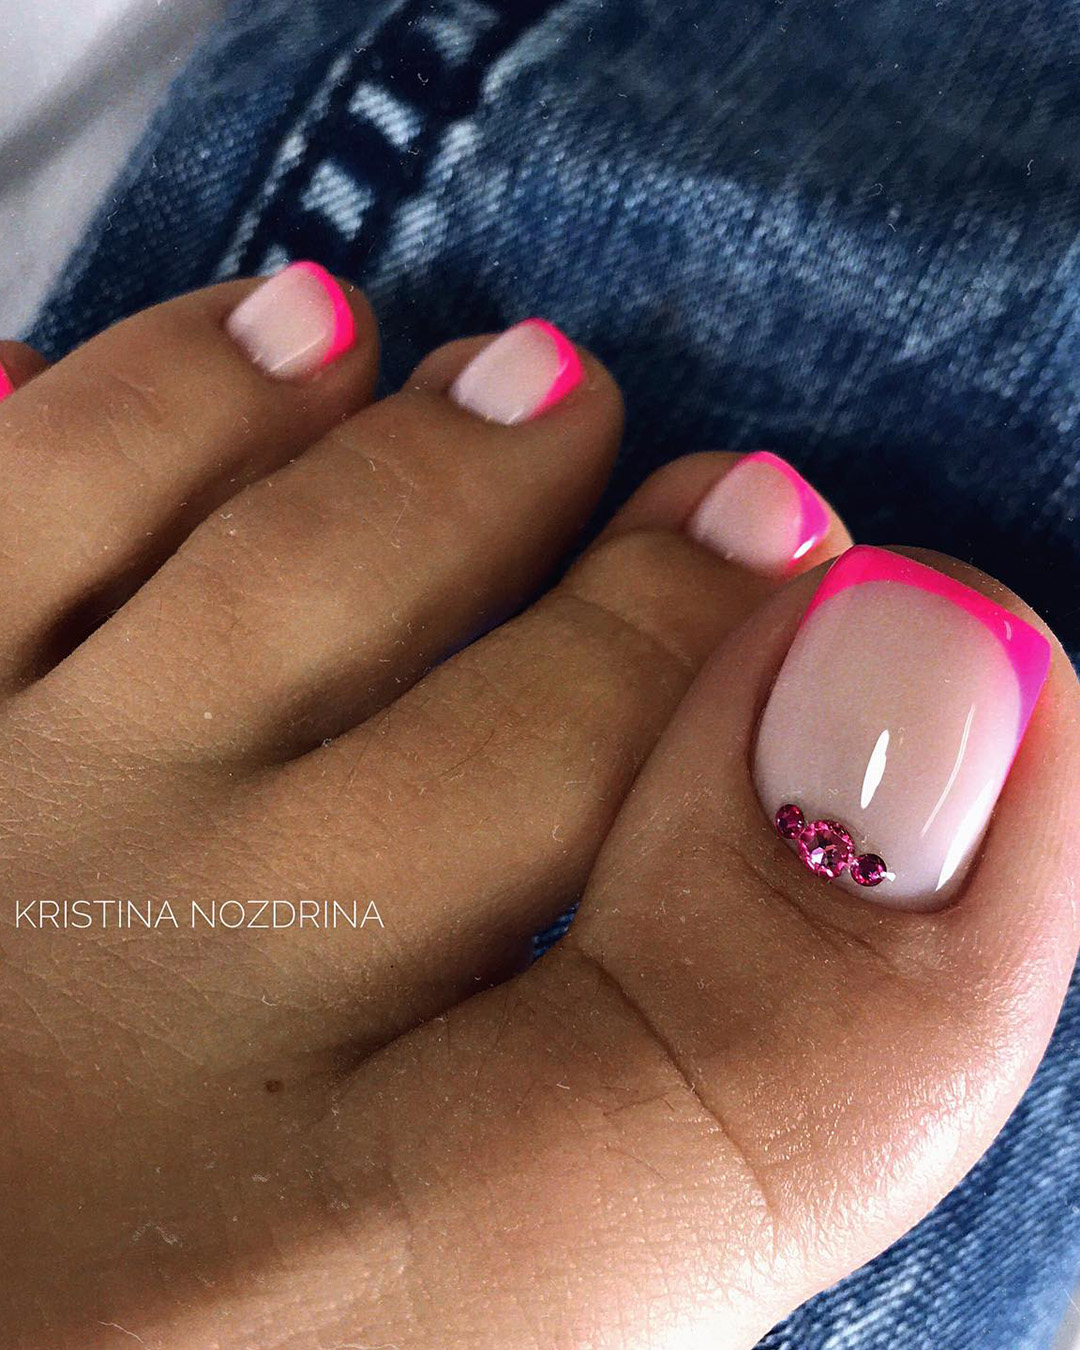 wedding toe nails bright french in pink tones with gems kristina_nozdrina